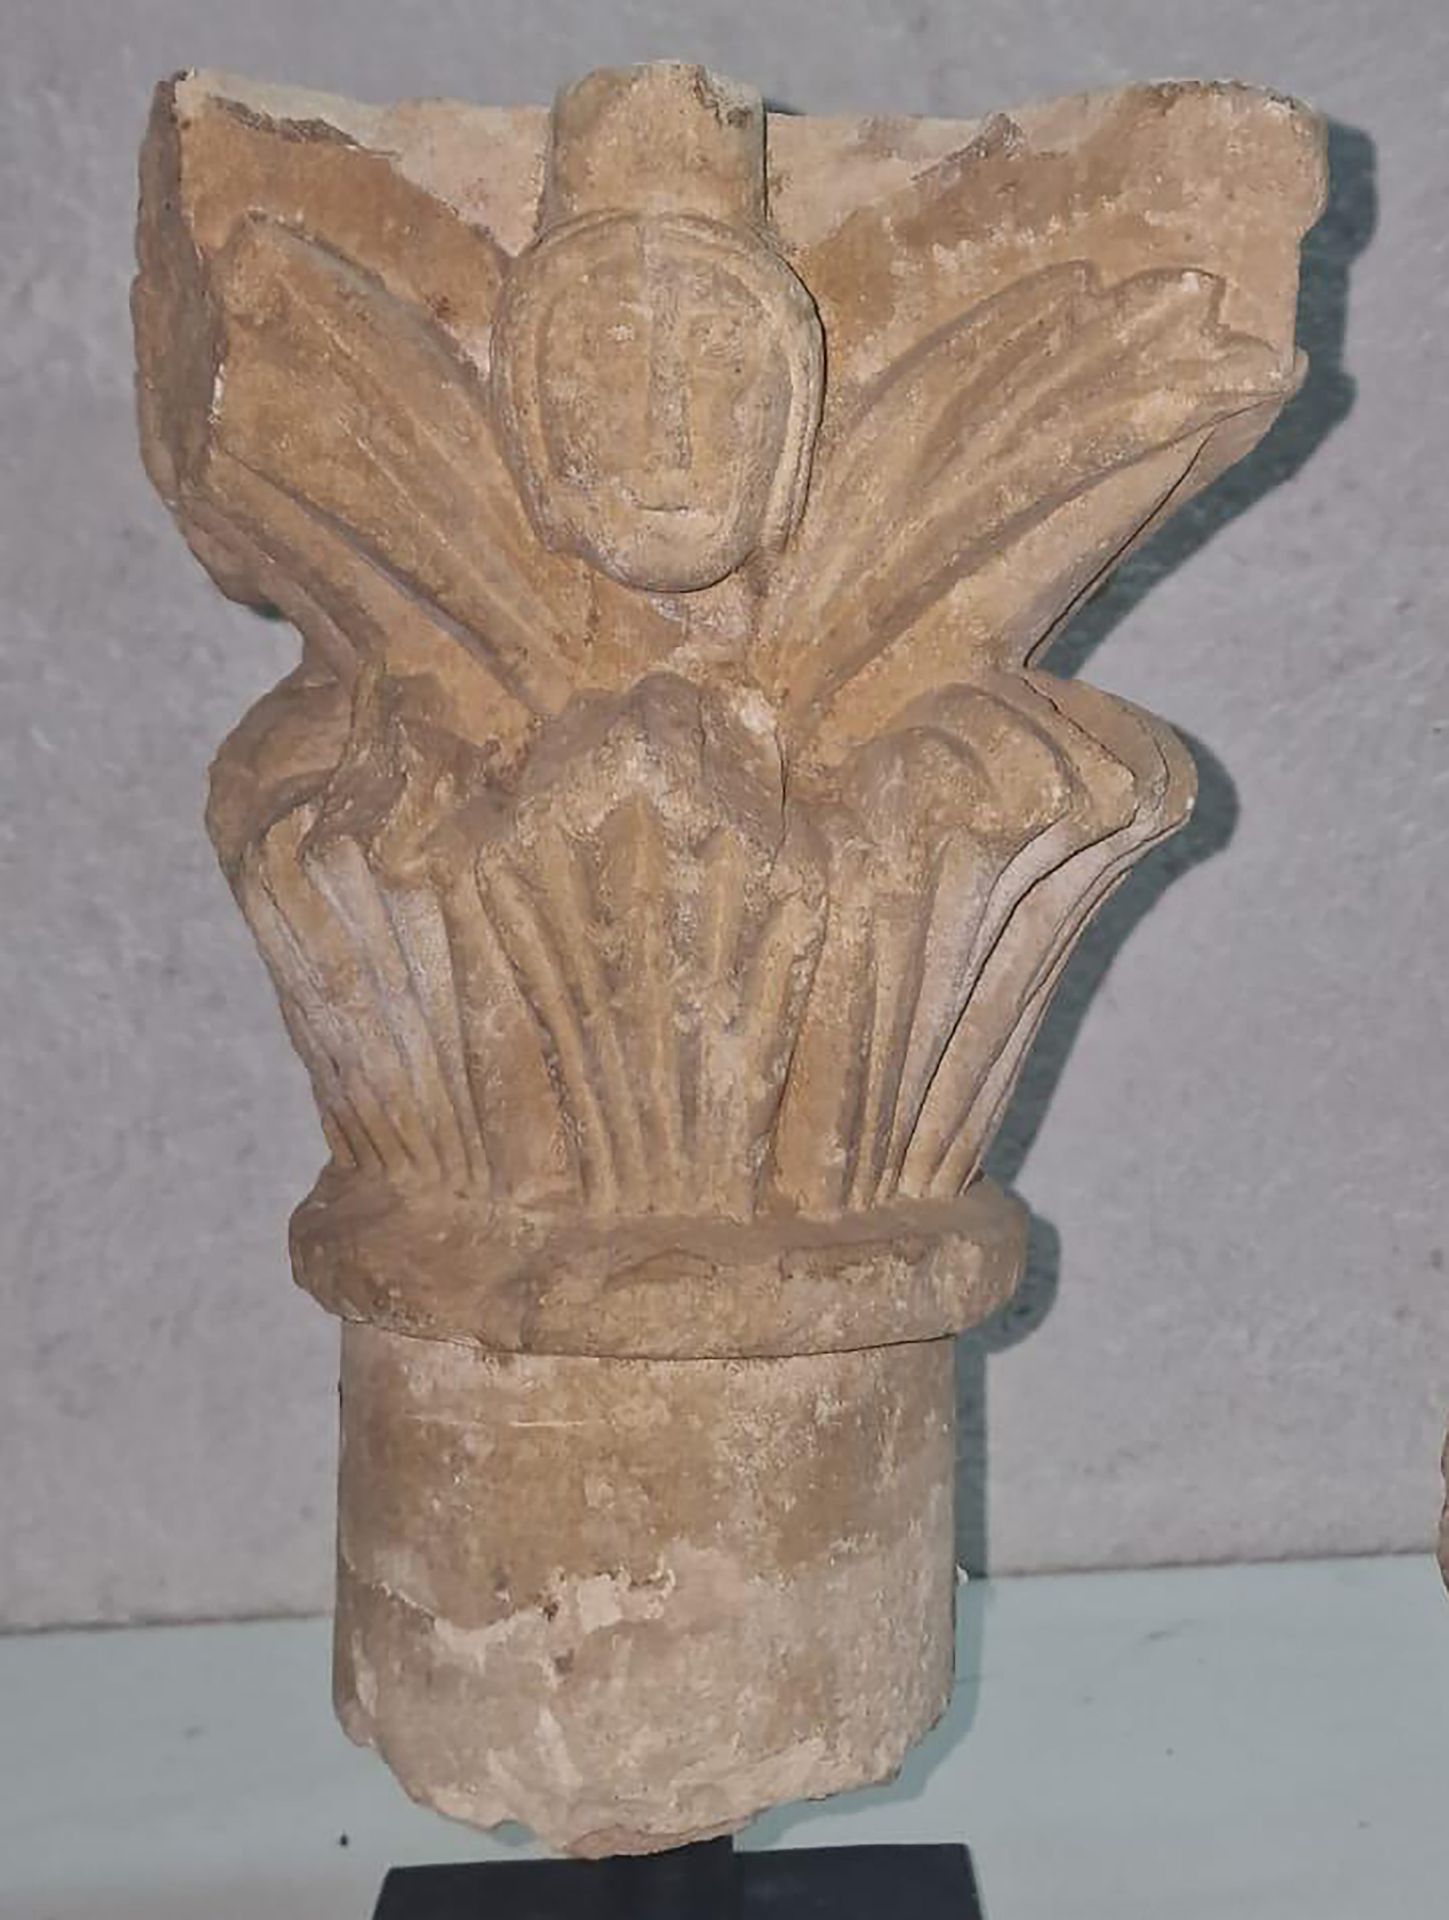 Late Capital - Catalan Romanesque in stone, 13th - 14th centuries - Image 2 of 4